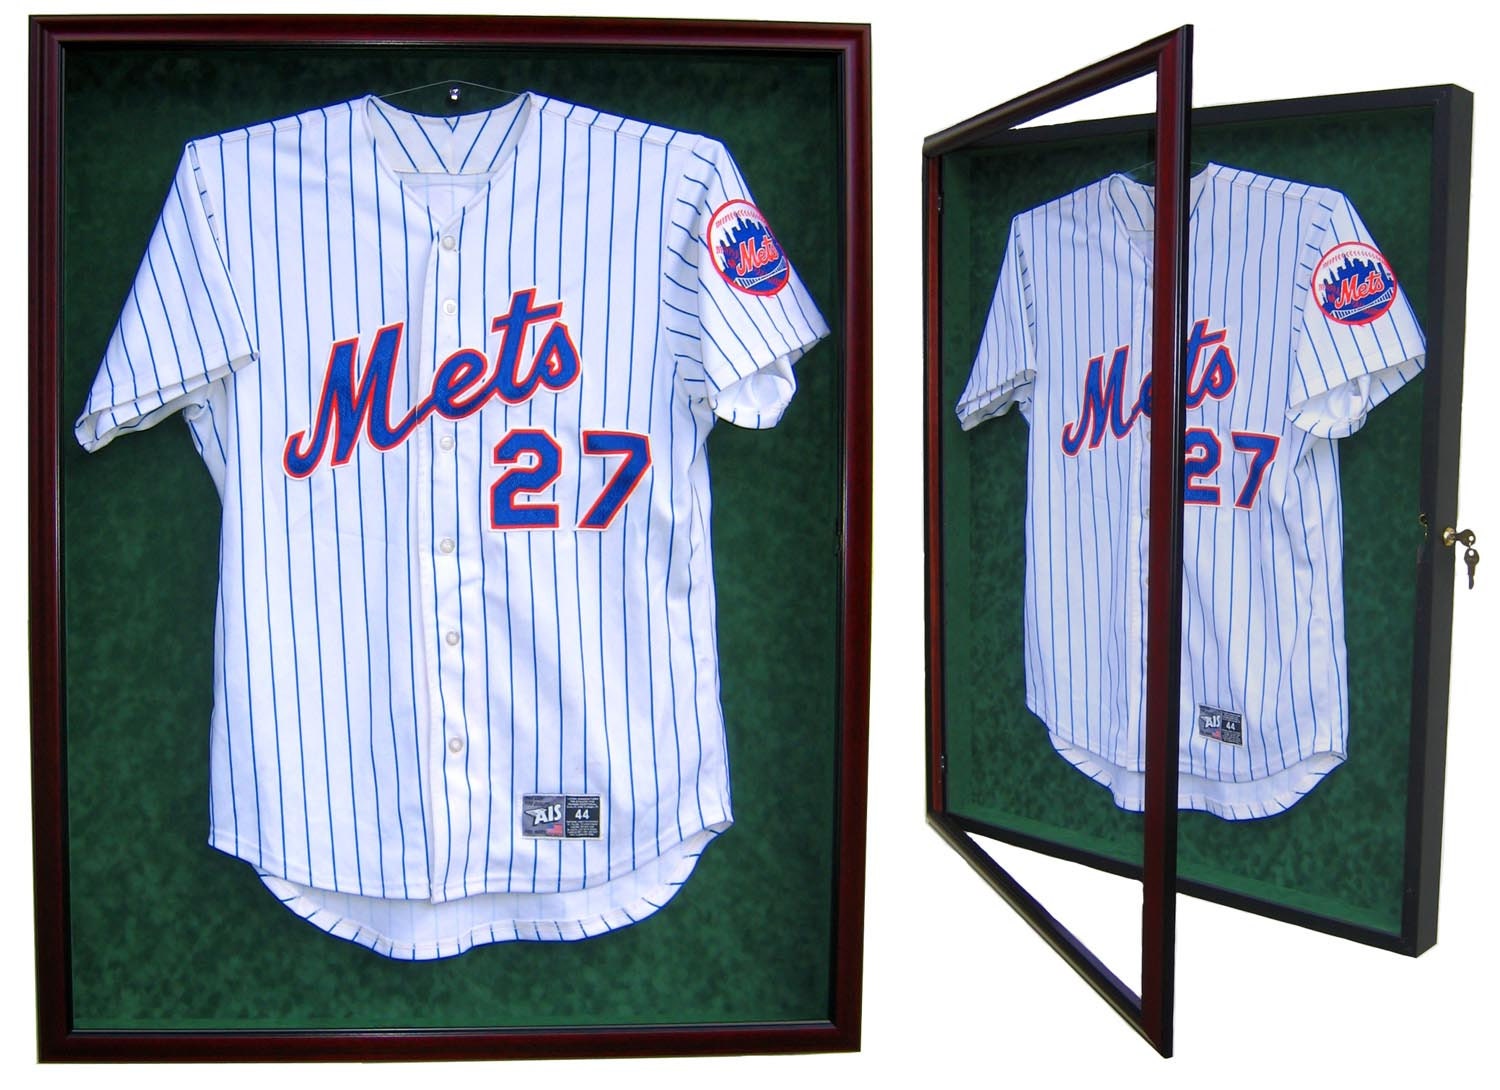  Miami Marlins Brown Framed Logo Jersey Display Case - Baseball  Jersey Logo Display Cases : Sports & Outdoors